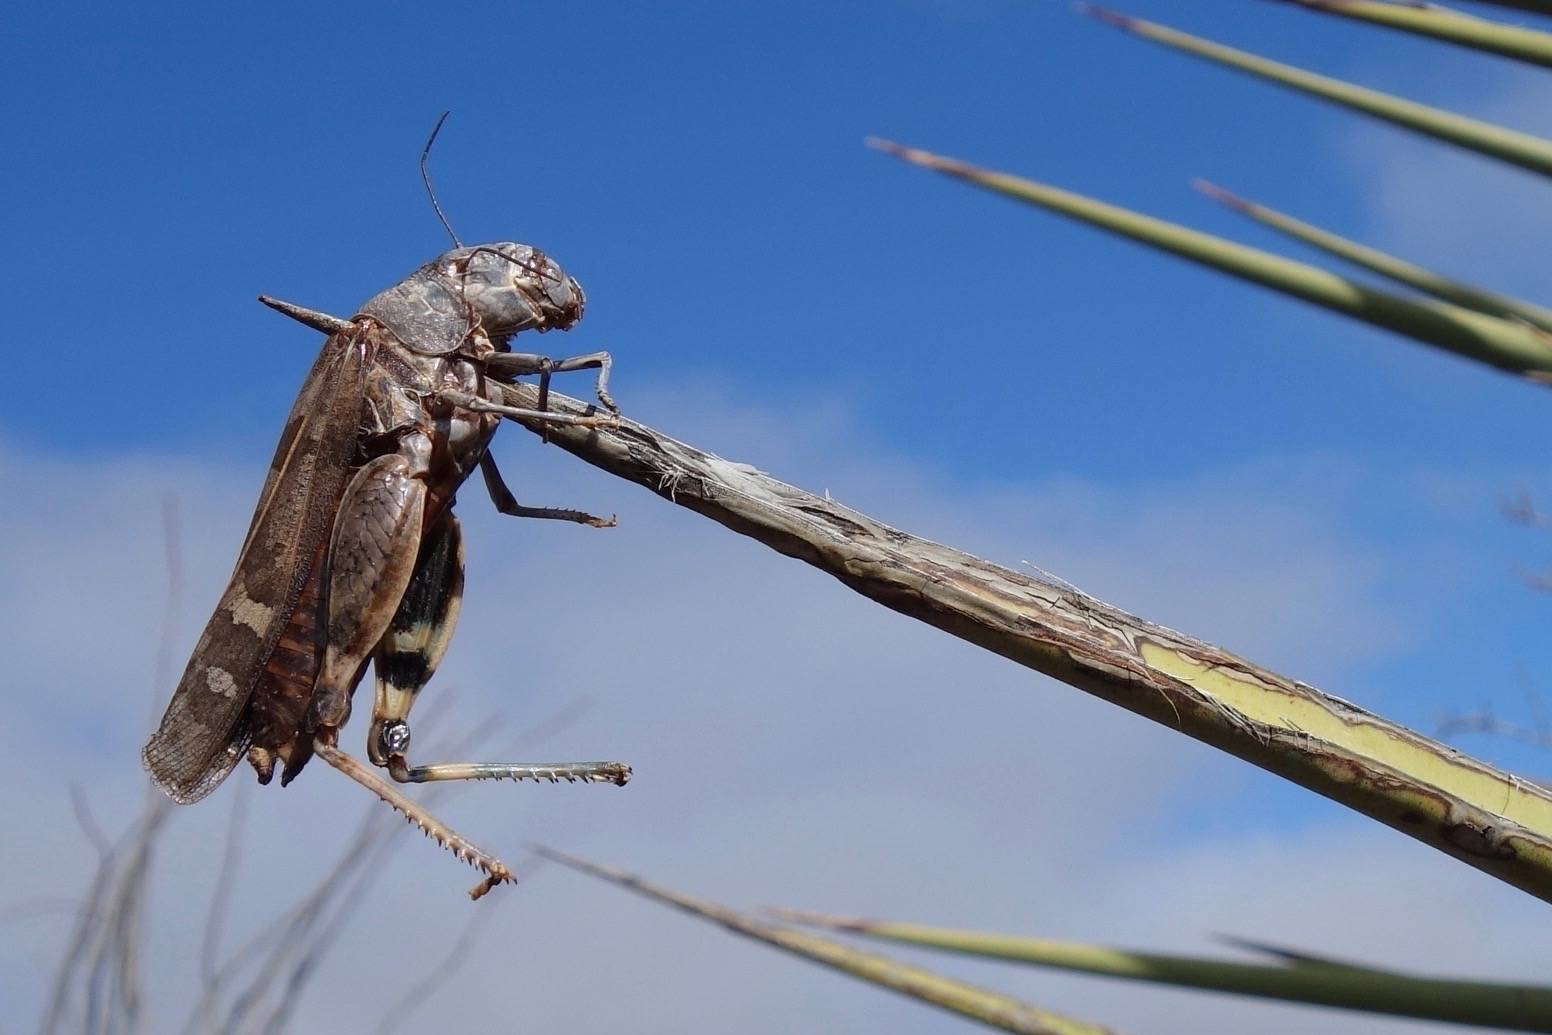 Courtesy Photo / Ned Rozell
An impaled grasshopper, probably the work of a shrike, is seen in West Texas.